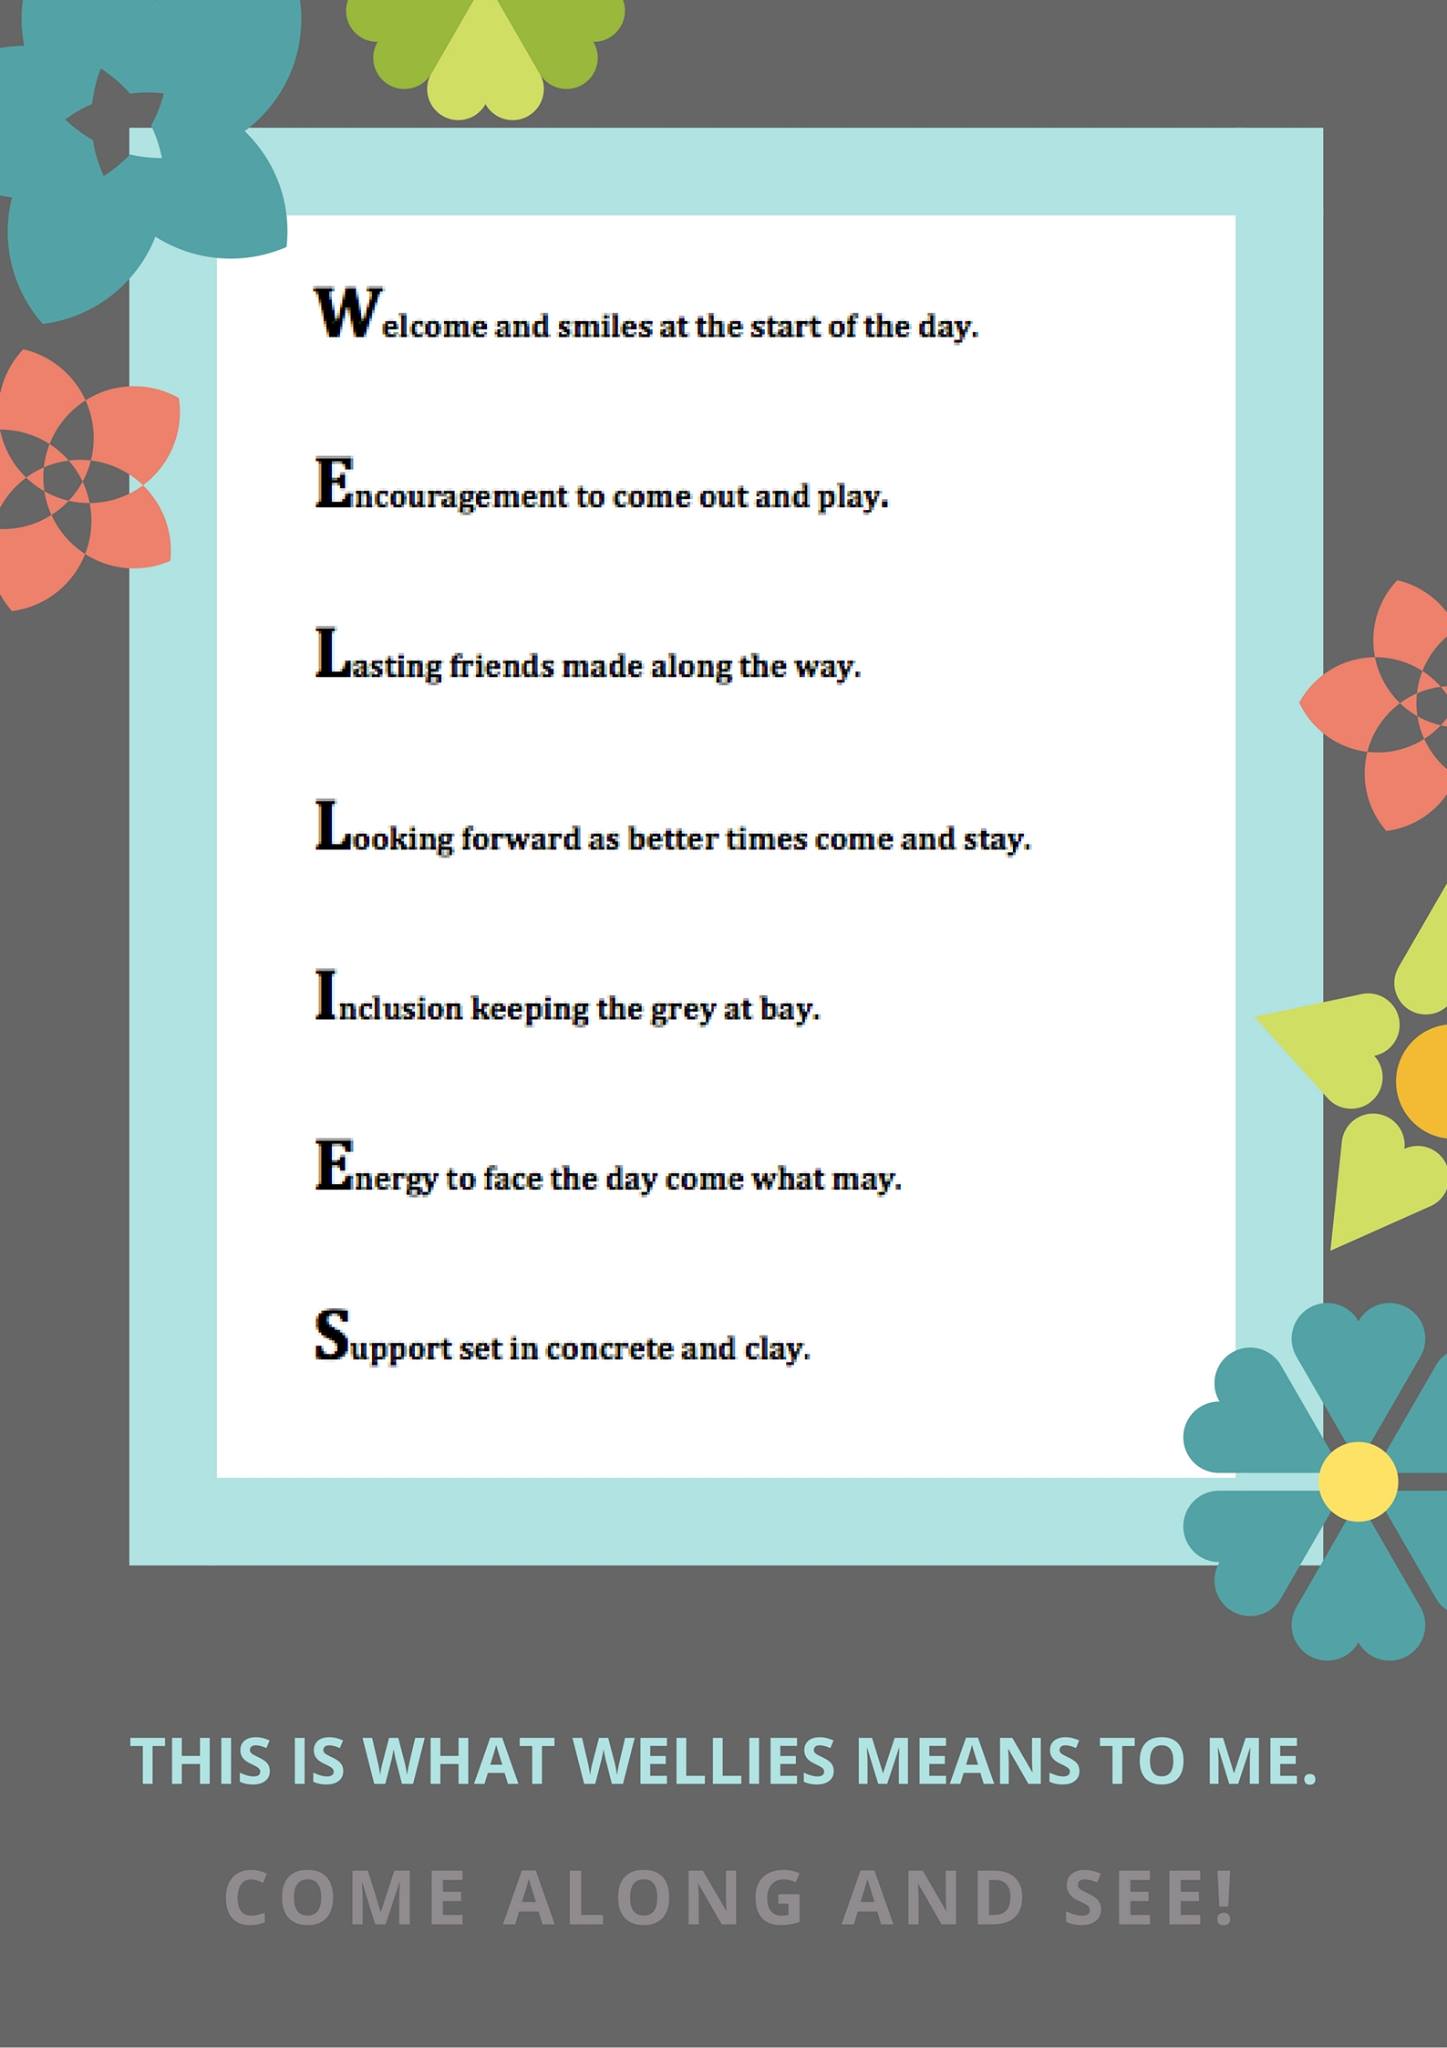 wellies-means-to-me-poem